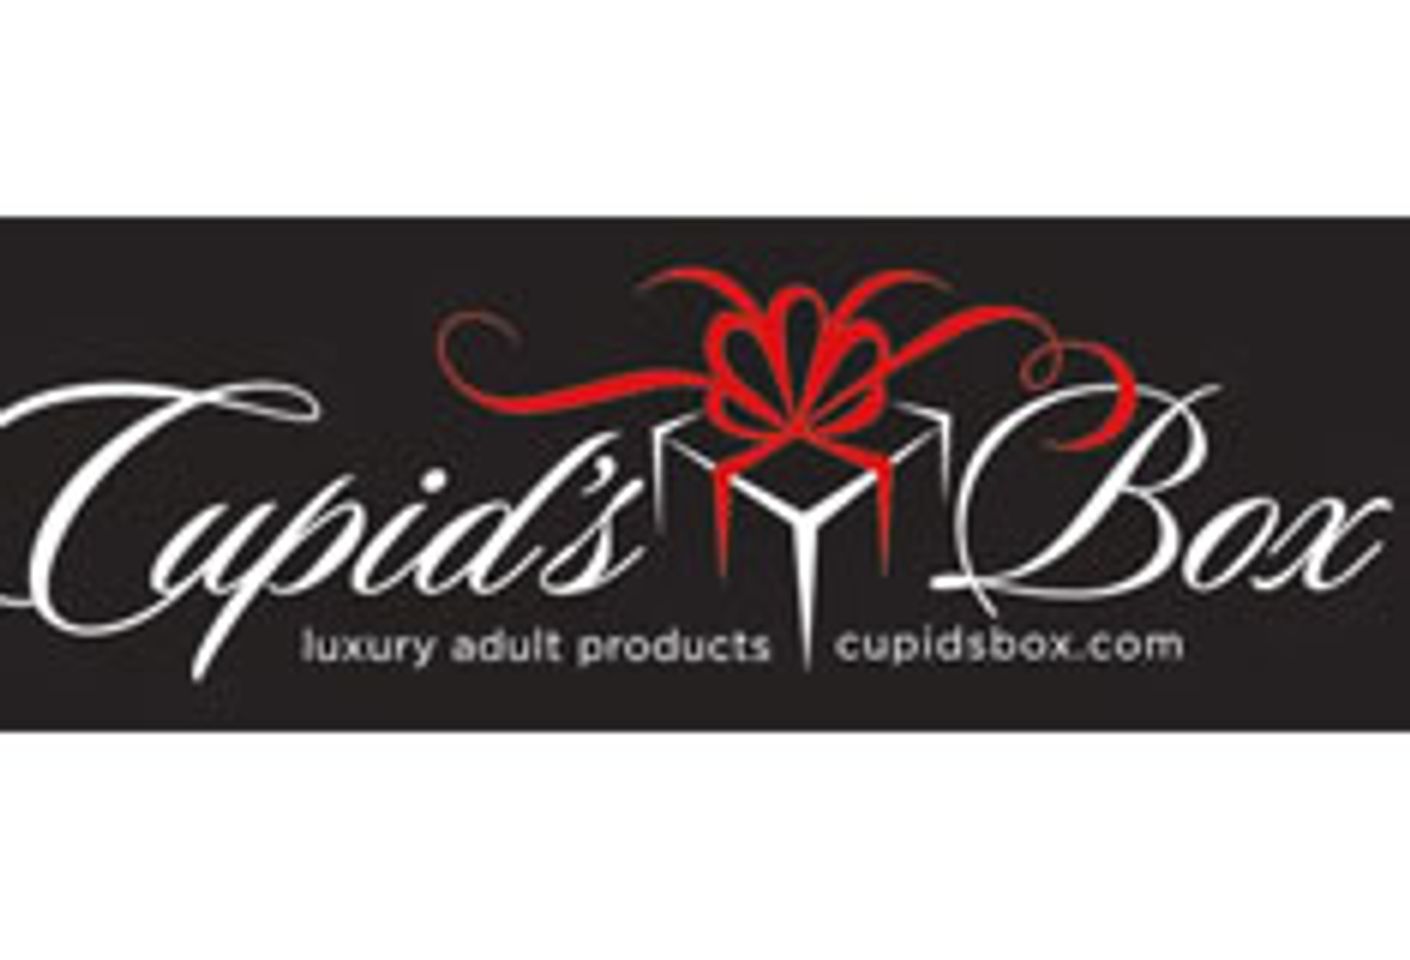 Online Retailer Cupid's Box Announces Gift Ideas for Couples